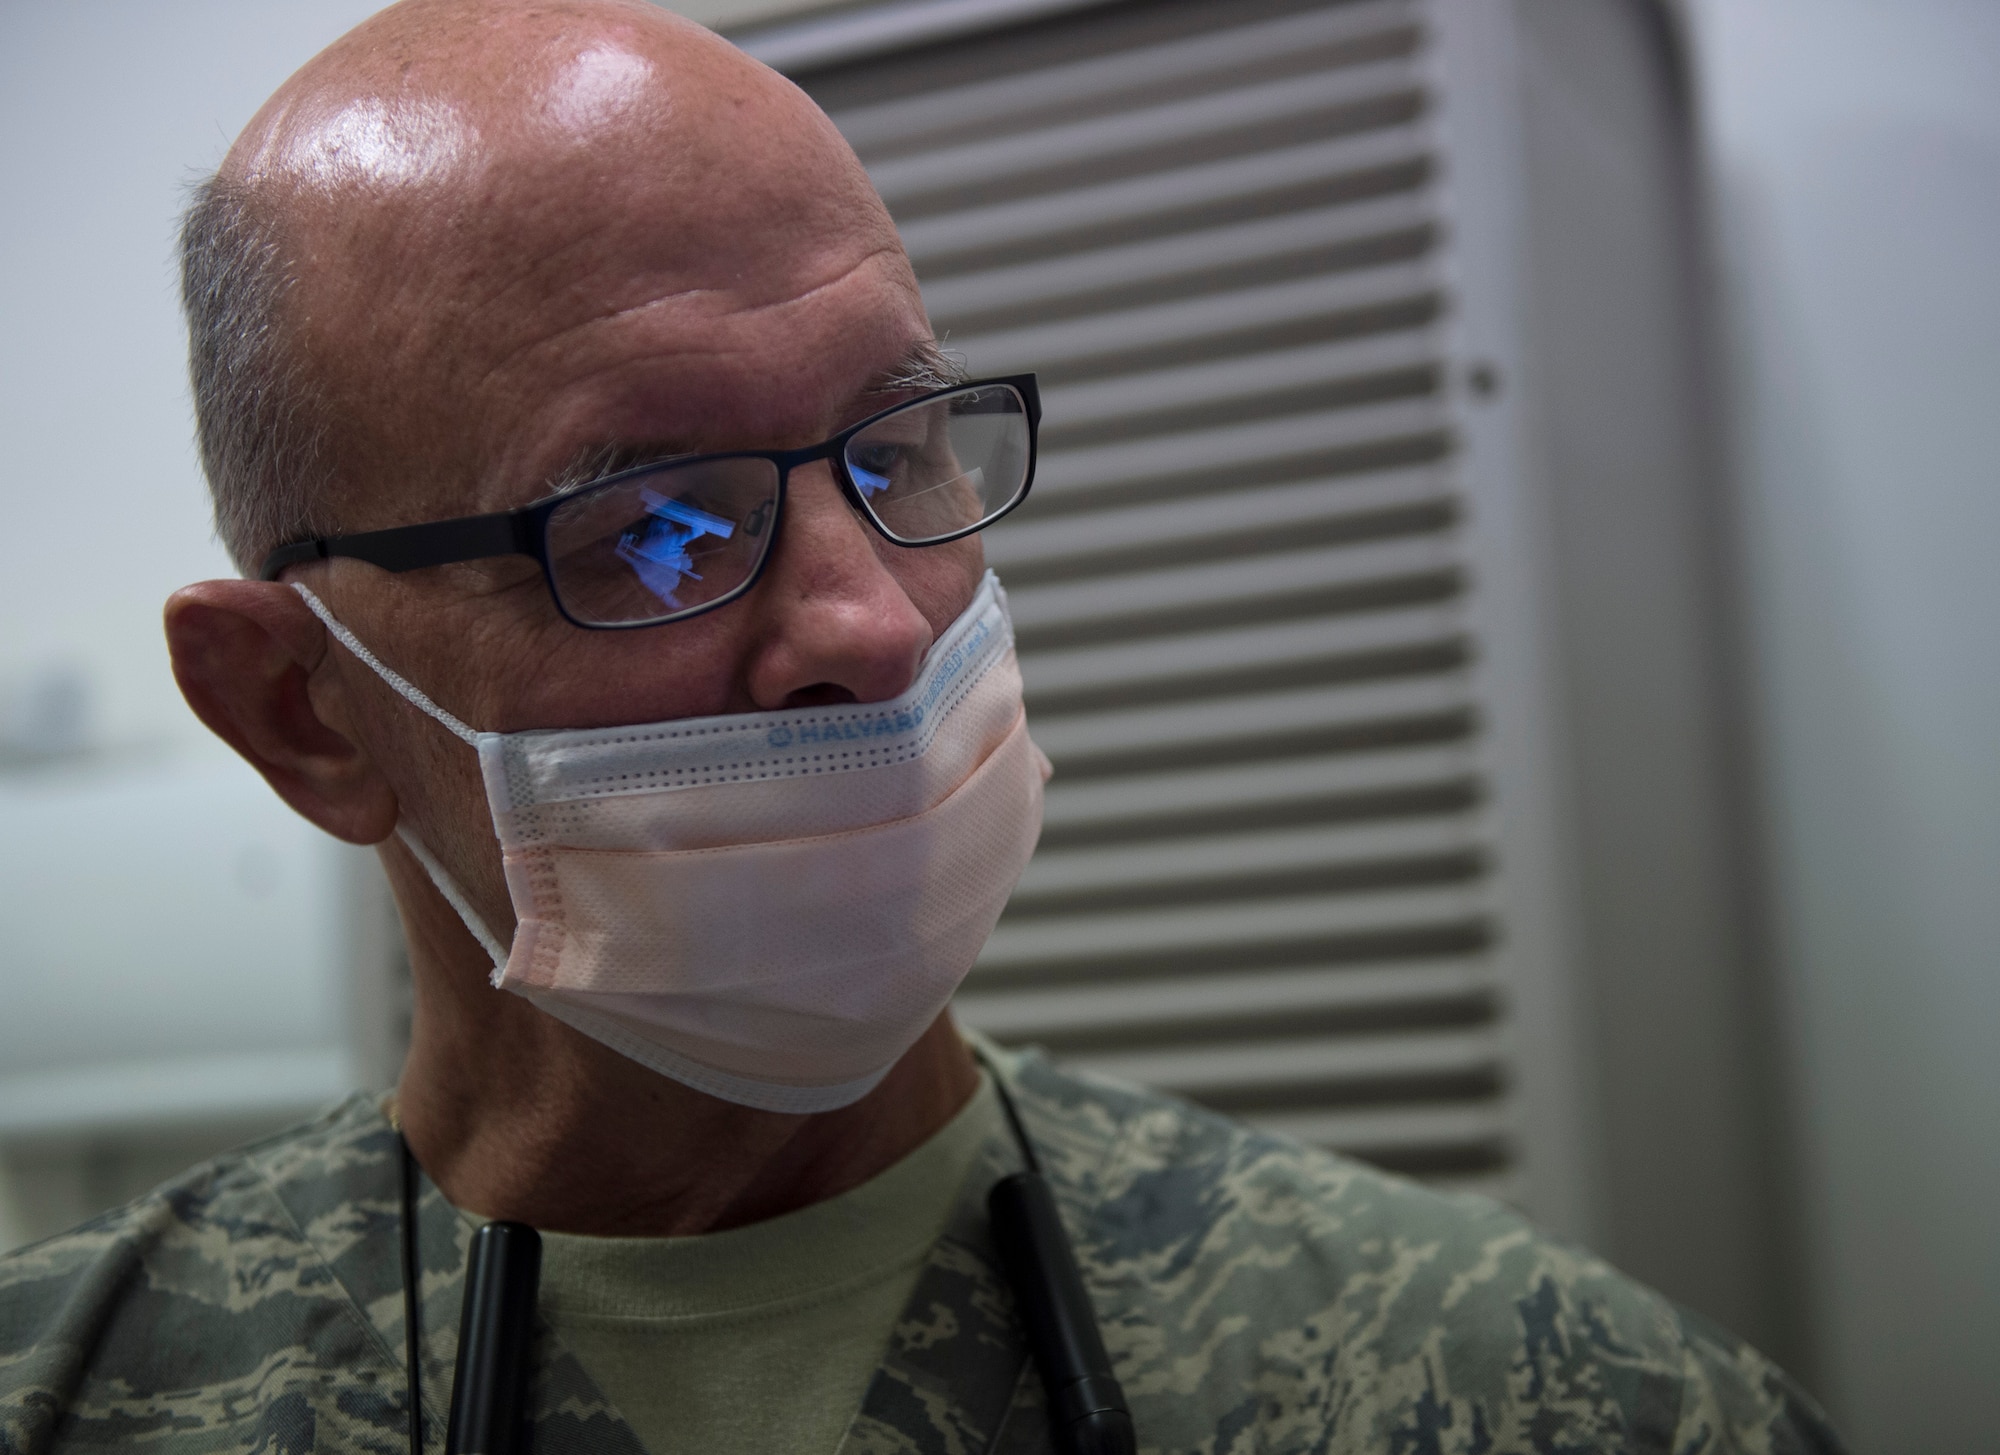 U.S. Air Force Lt. Col. Trent Payne, a dentist with the 379th Expeditionary Medical Operations Squadron, reviews a patient’s x-ray at Al Udeid Air Base, Qatar, May 15, 2017. Airmen assigned to the dental section provide a wide range of services to include examinations, diagnosis and basic treatments of problems relating to the tooth or the mouth. (U.S. Air Force photo by Tech. Sgt. Amy M. Lovgren)